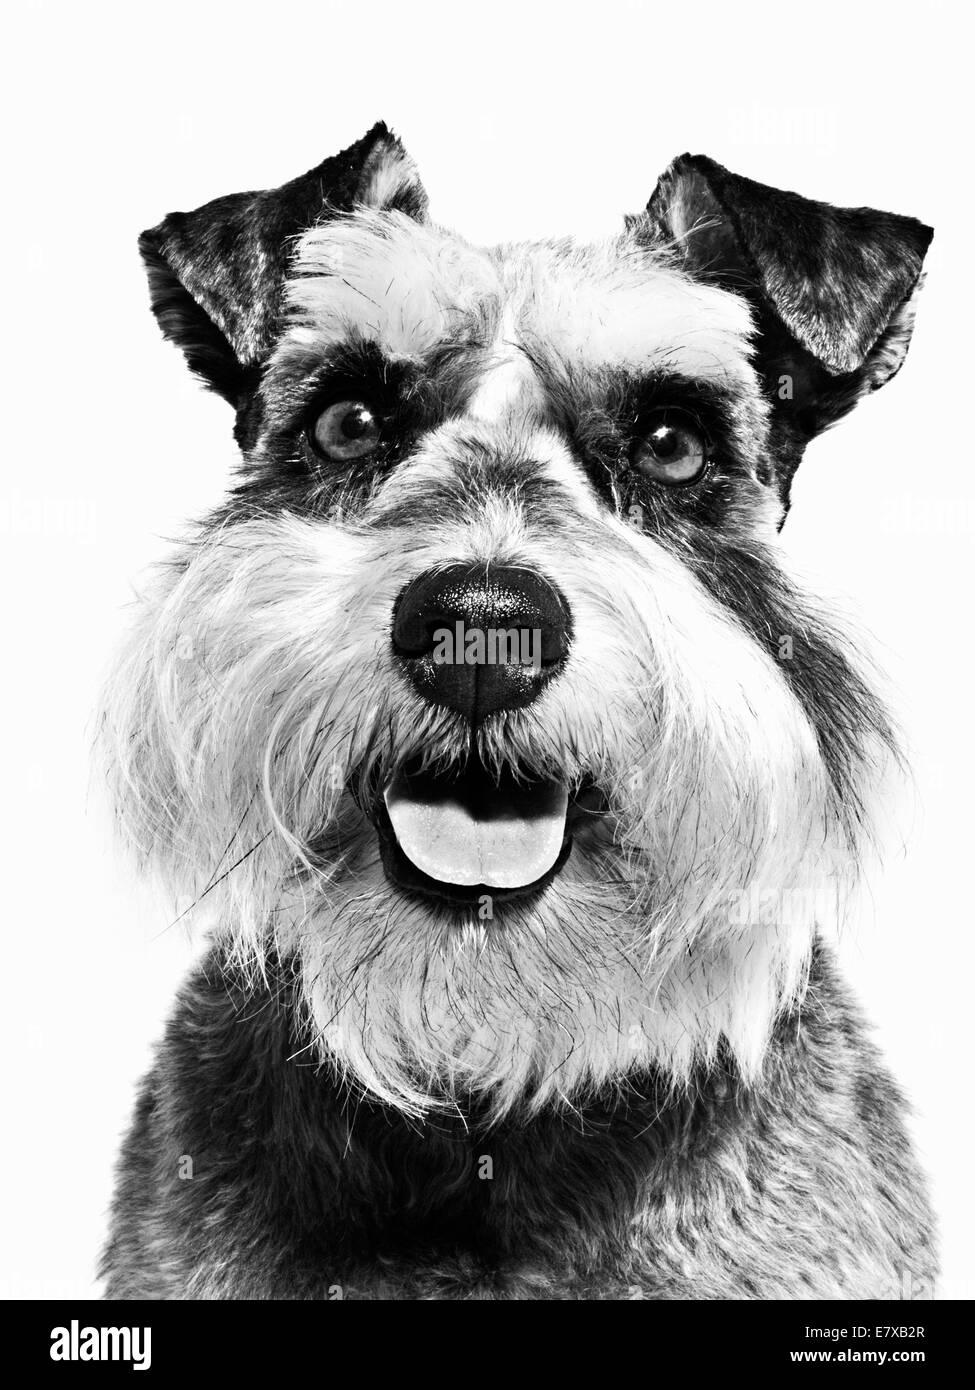 Miniature Schnauzer, this breed of small dog of the Schnauzer type that originated in Germany in the mid-to-late 19th century. Stock Photo